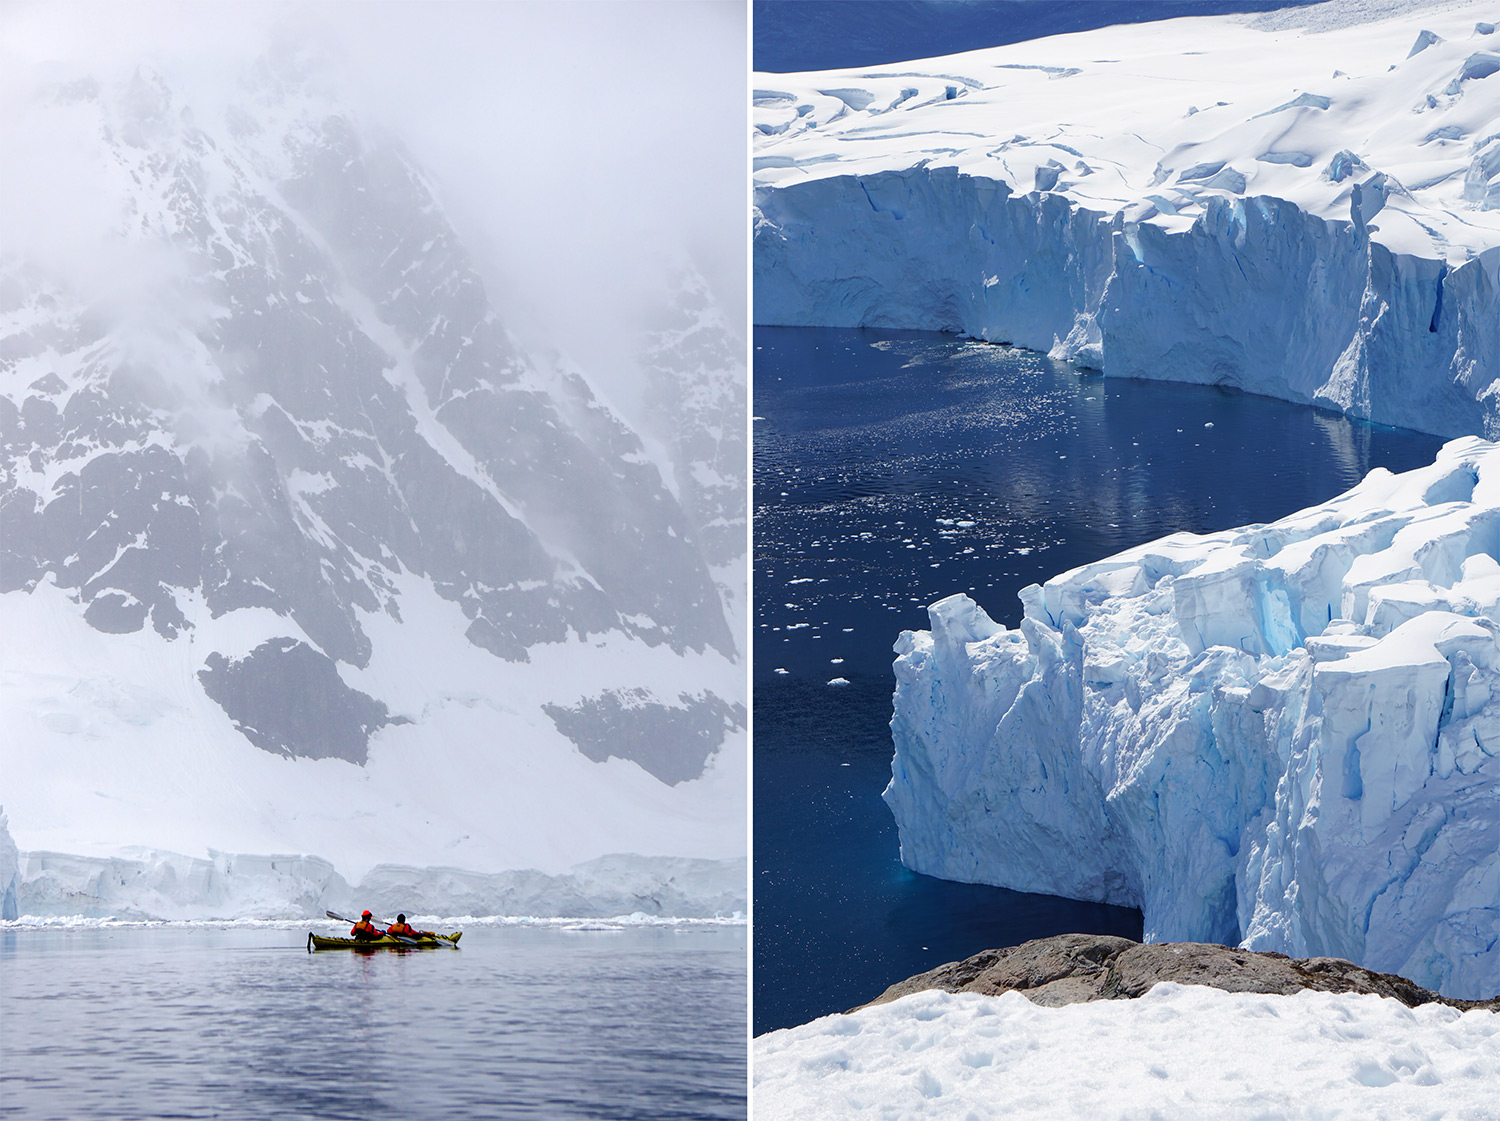 kayakers in antarctica, the edge of a glacier